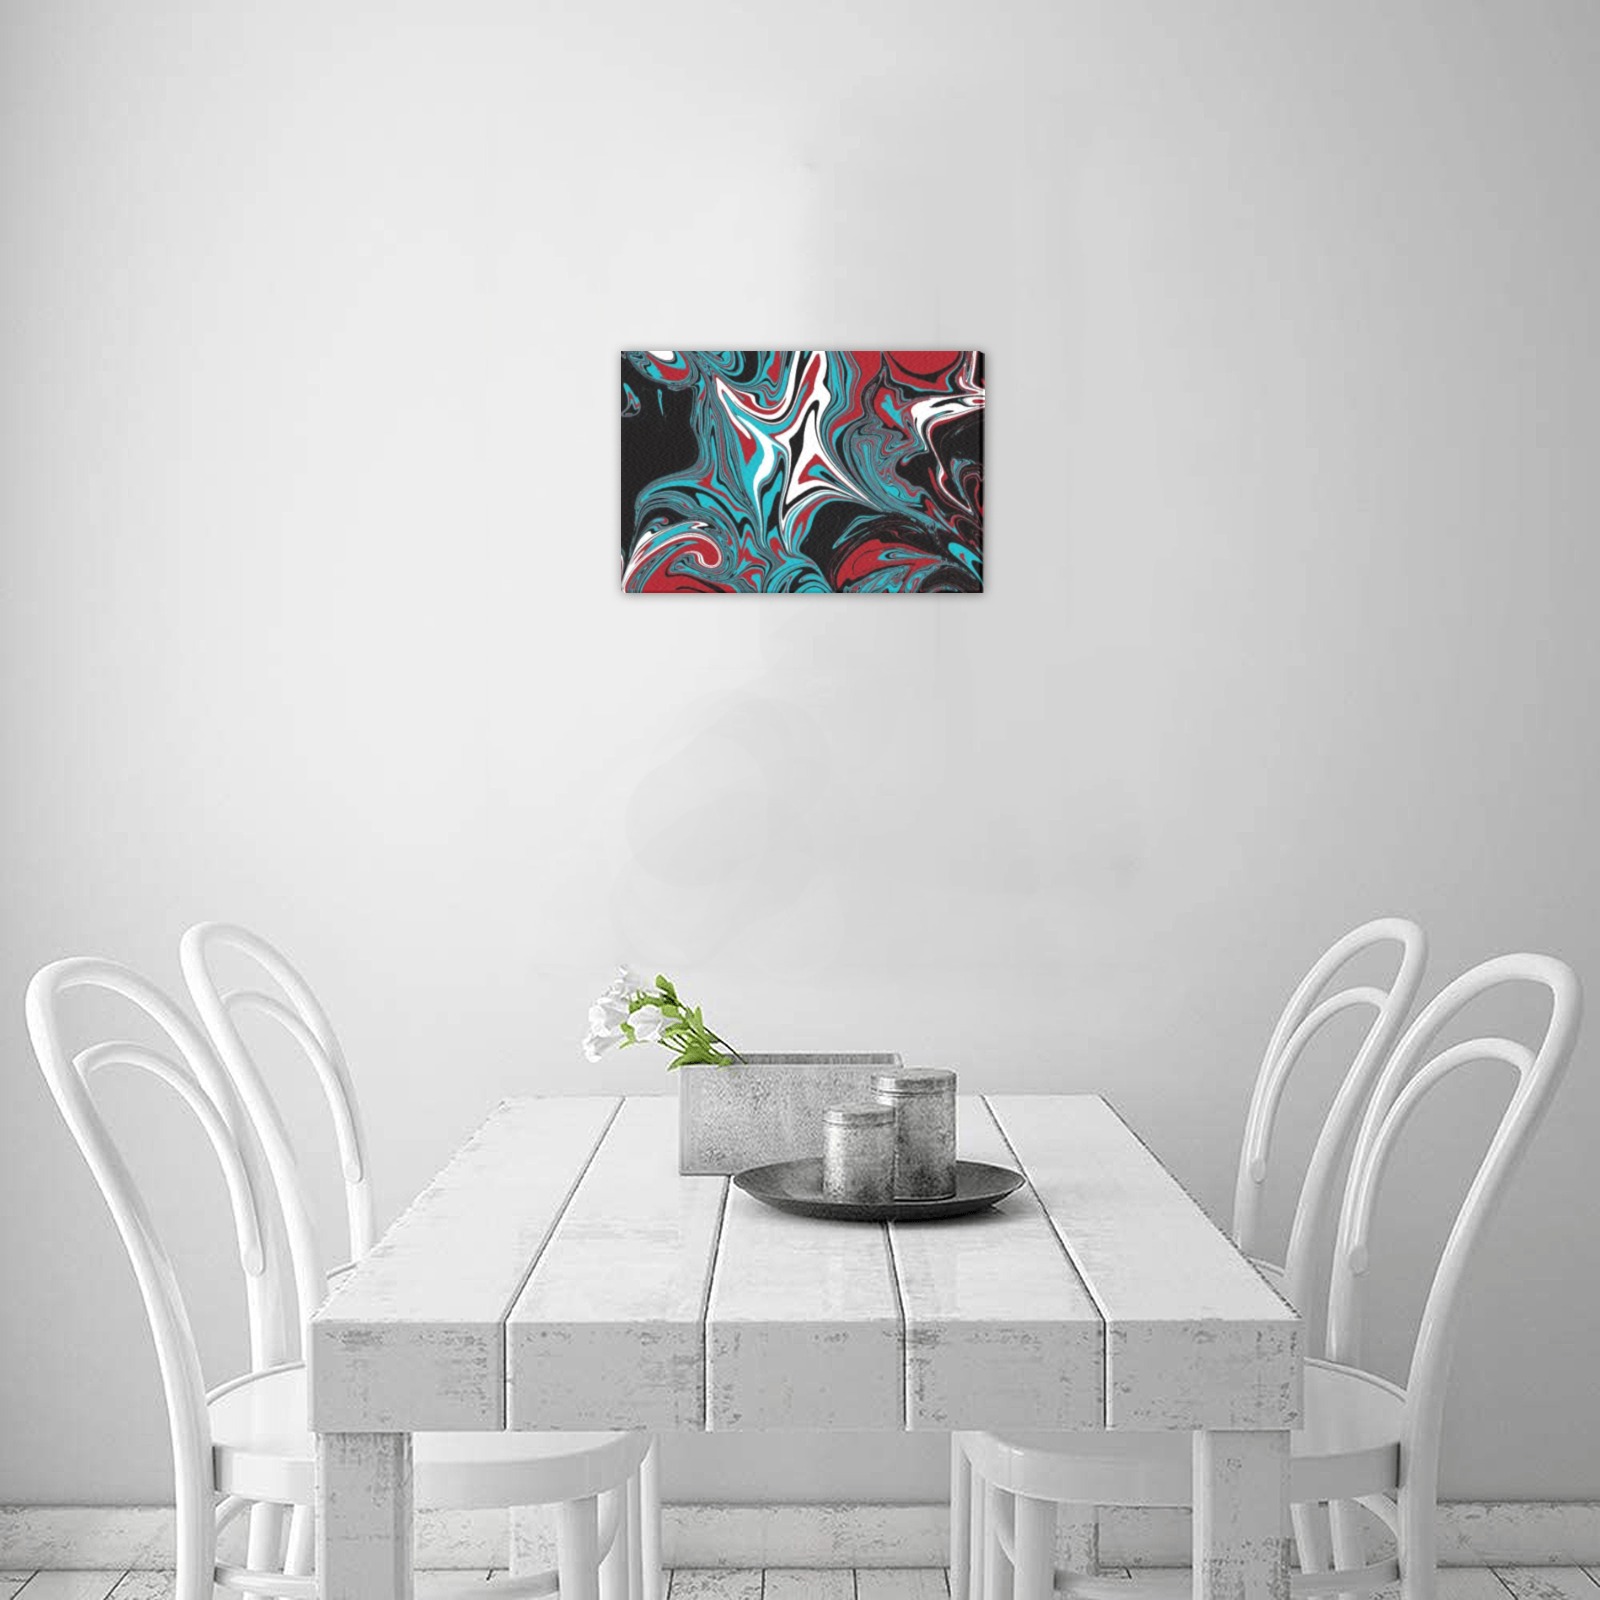 Dark Wave of Colors Upgraded Canvas Print 6"x4"